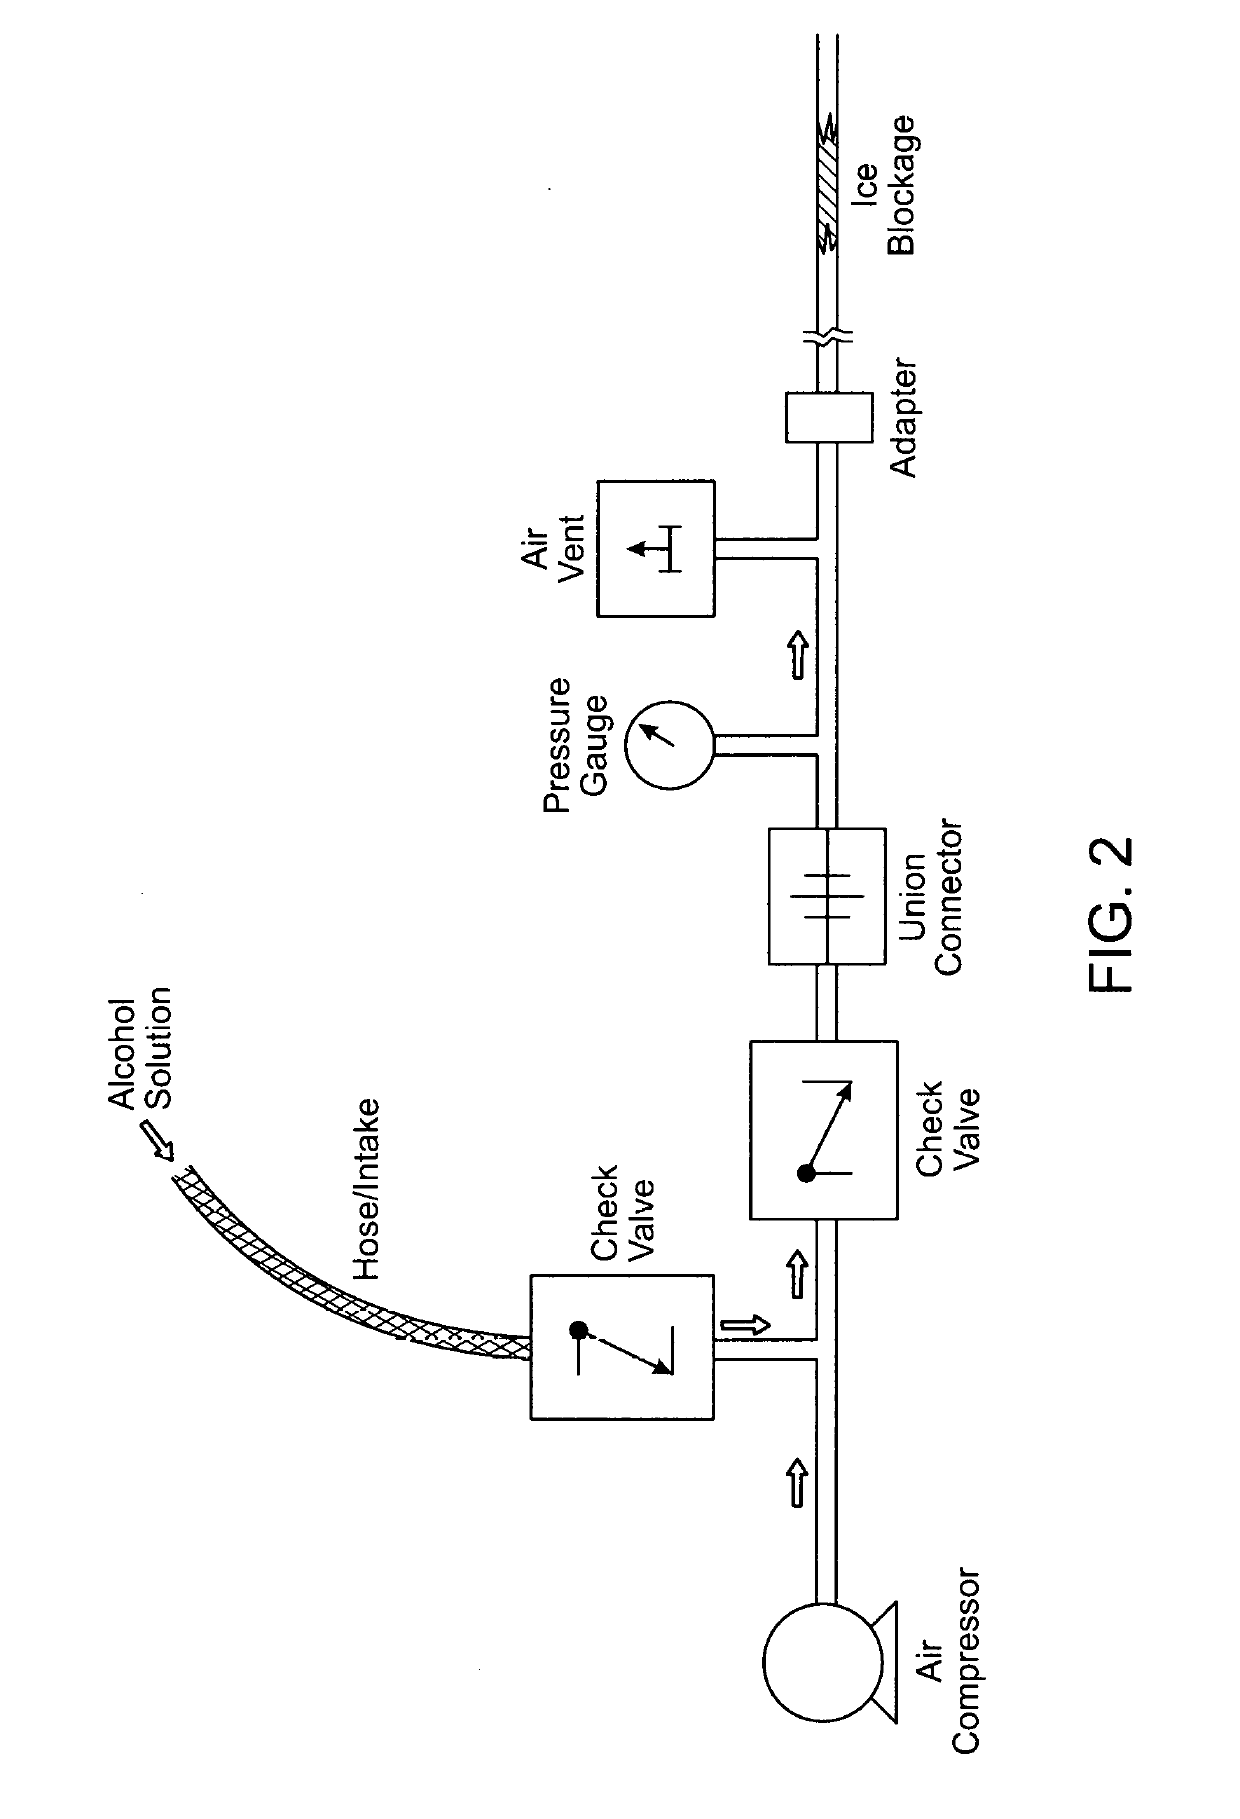 Davice for thawing frozen pipes and method of use of same